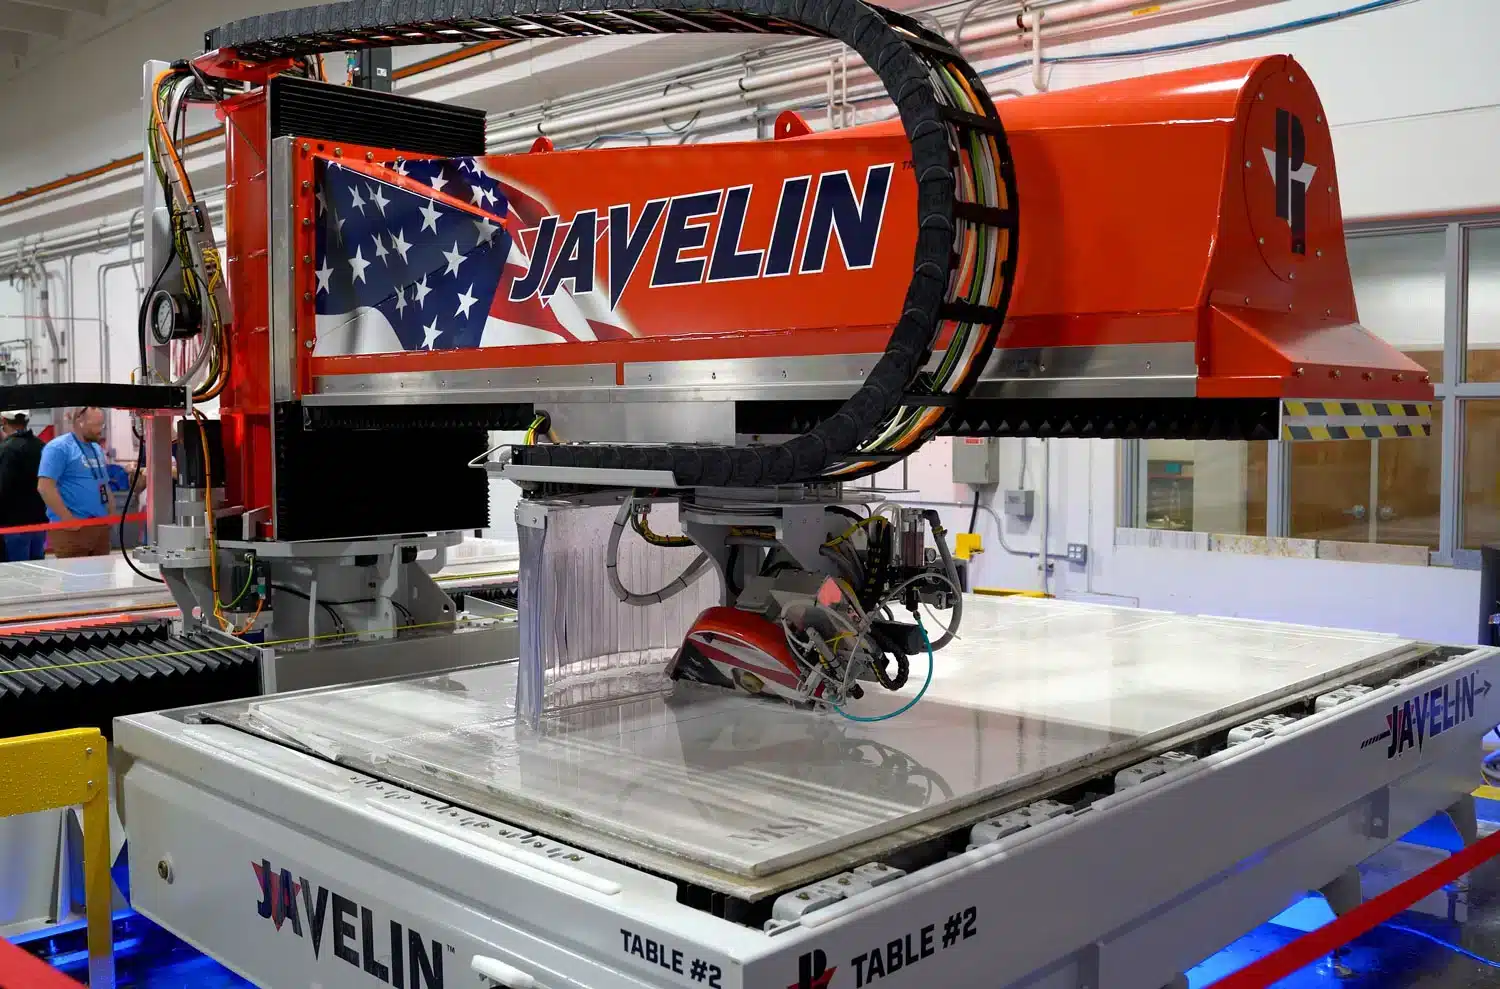 JAVELIN CNC Sawjet for Countertop Fabrication